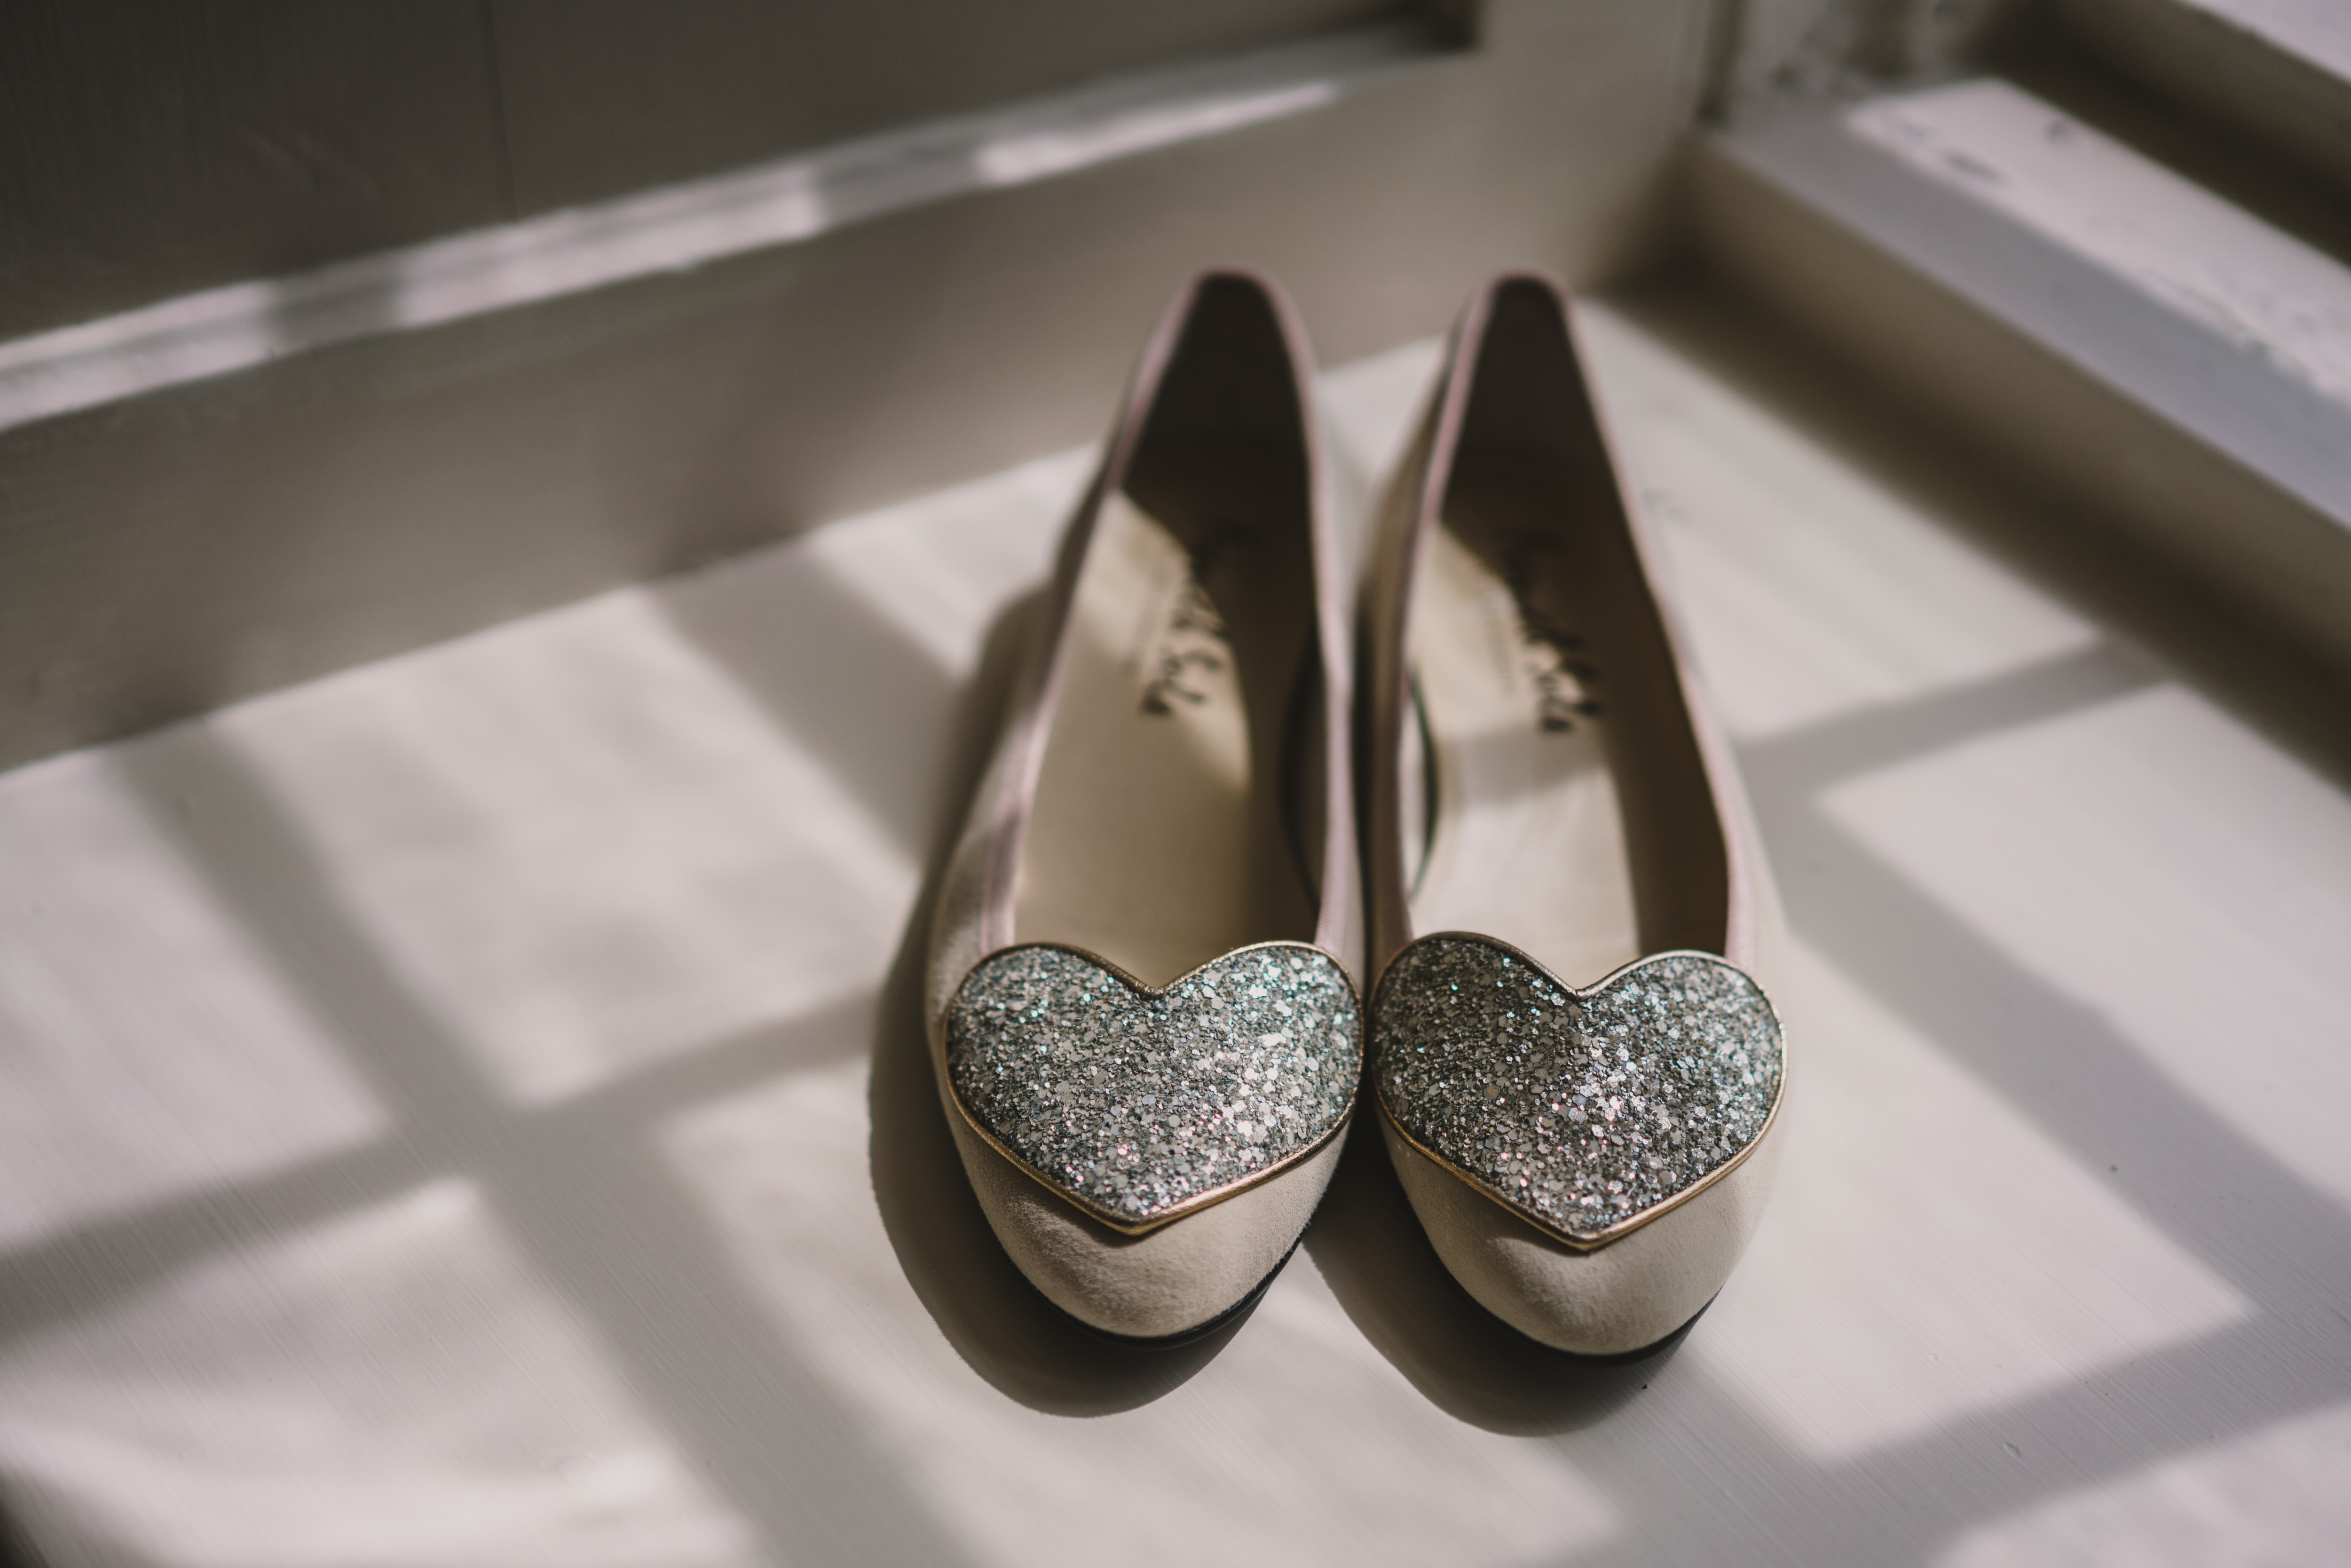 french sole wedding shoes